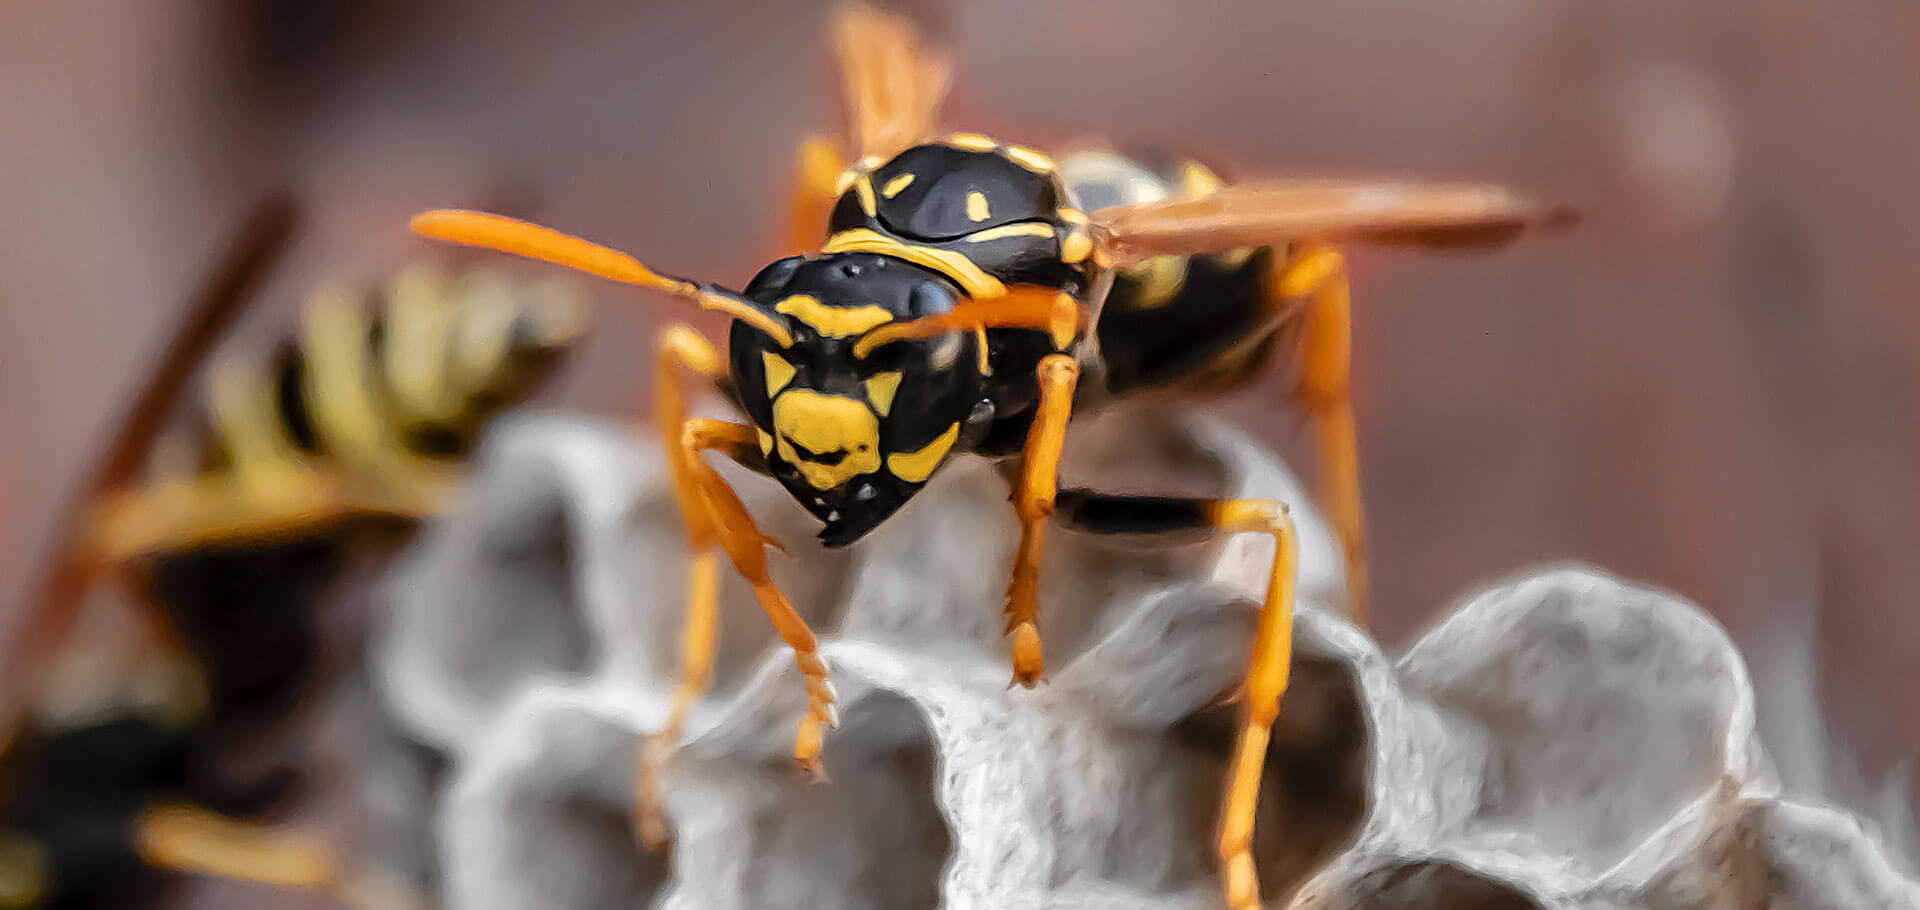 Wasps in dallas: the great outdoor threat